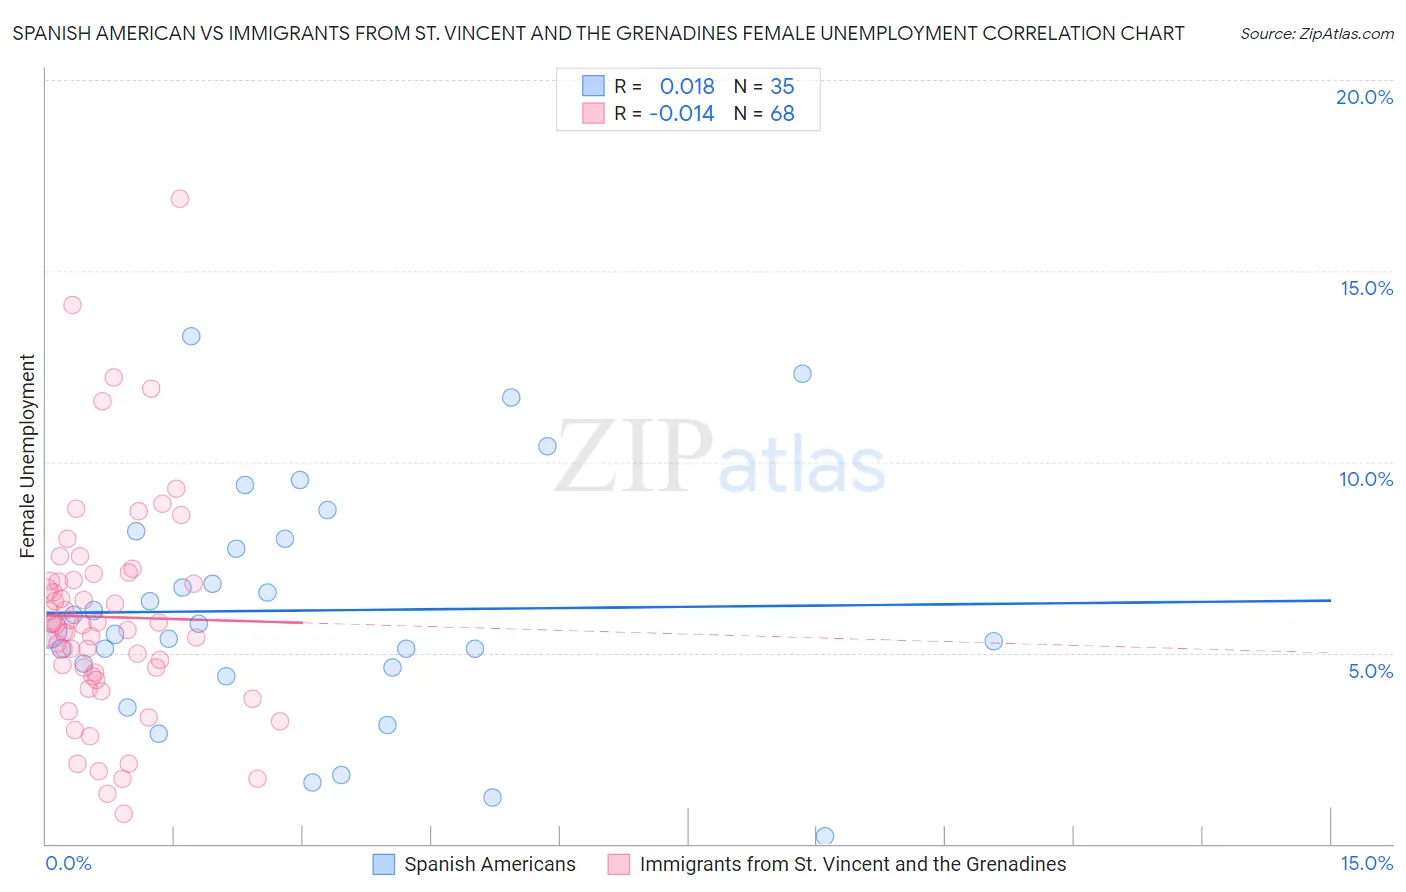 Spanish American vs Immigrants from St. Vincent and the Grenadines Female Unemployment